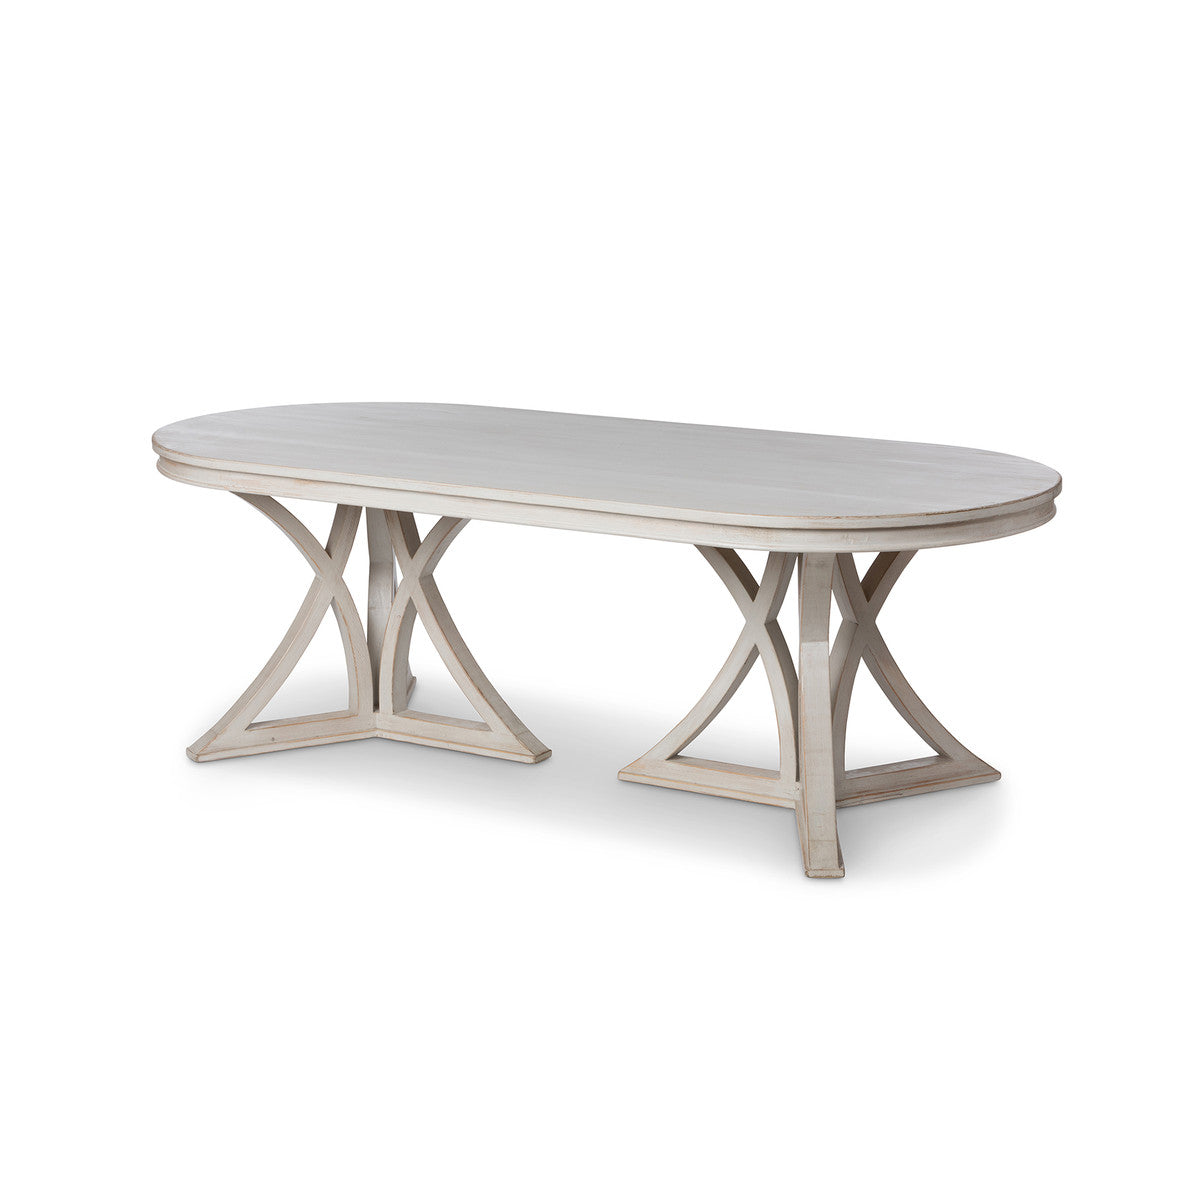 Park Hill Delray Oval Dining Table EFT20117